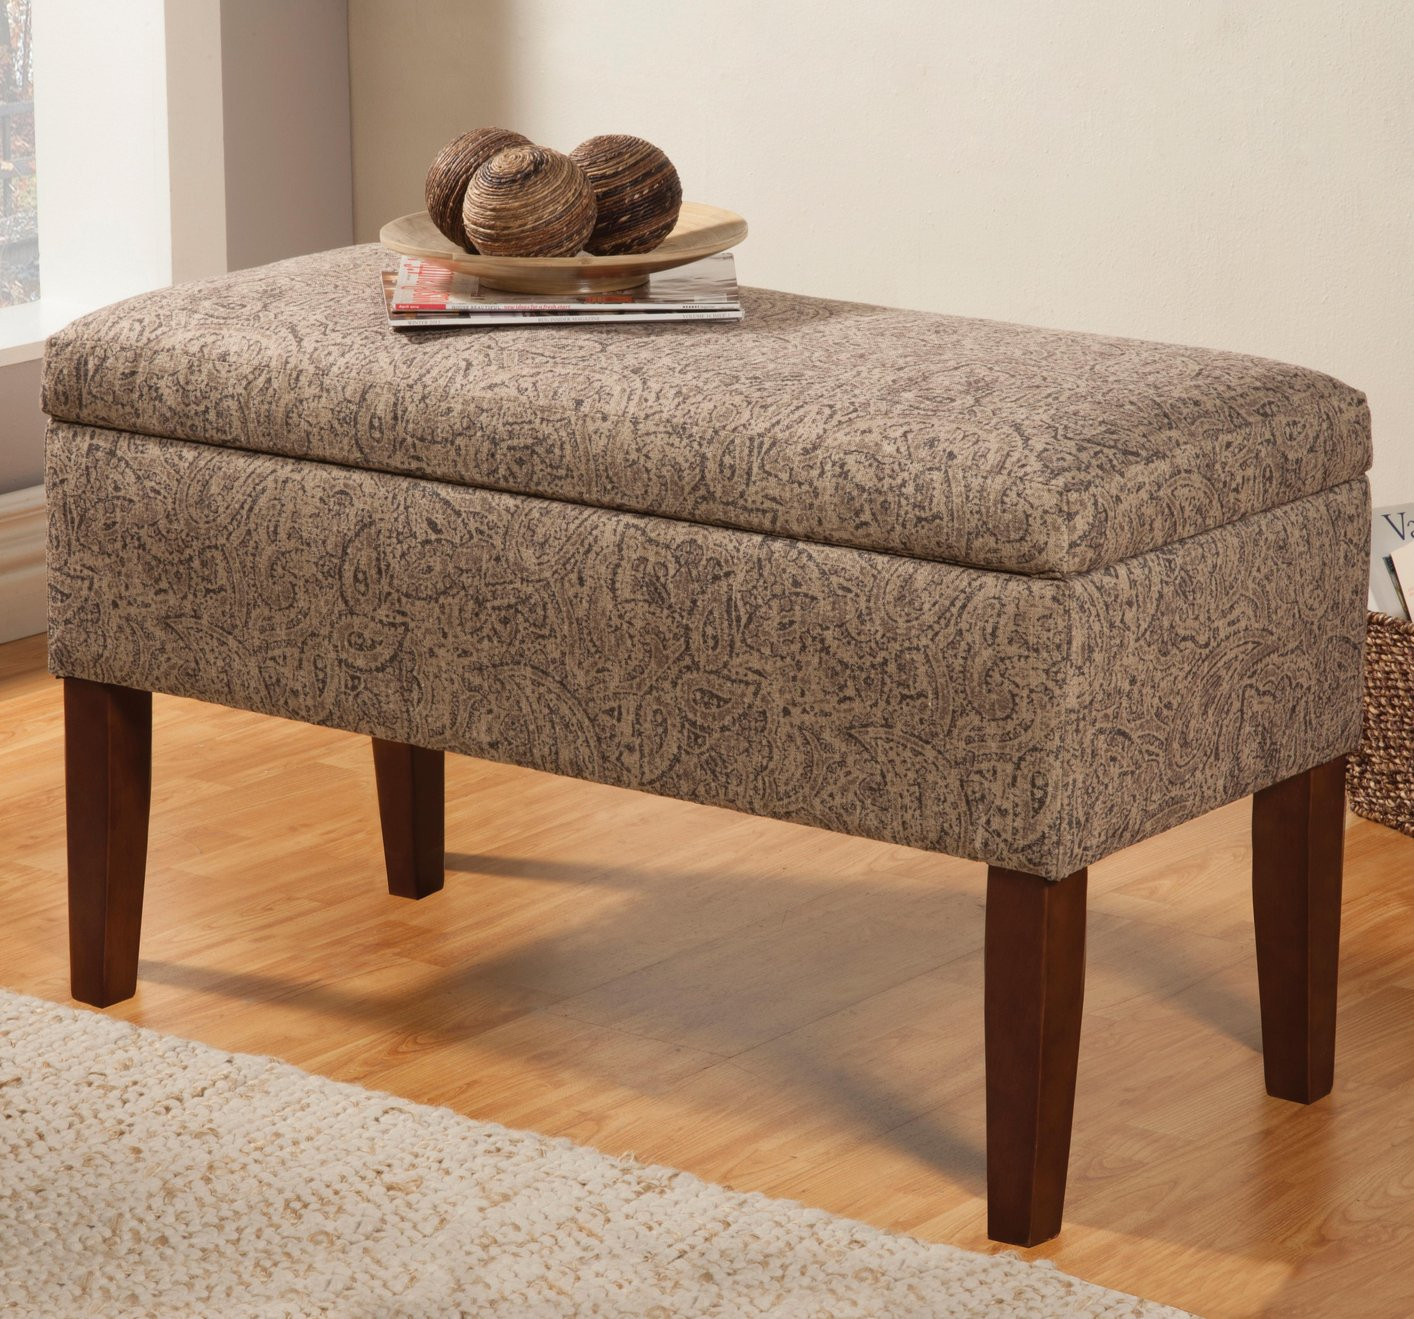 Fabric Bench With Storage
 Beige Fabric Storage Bench Steal A Sofa Furniture Outlet